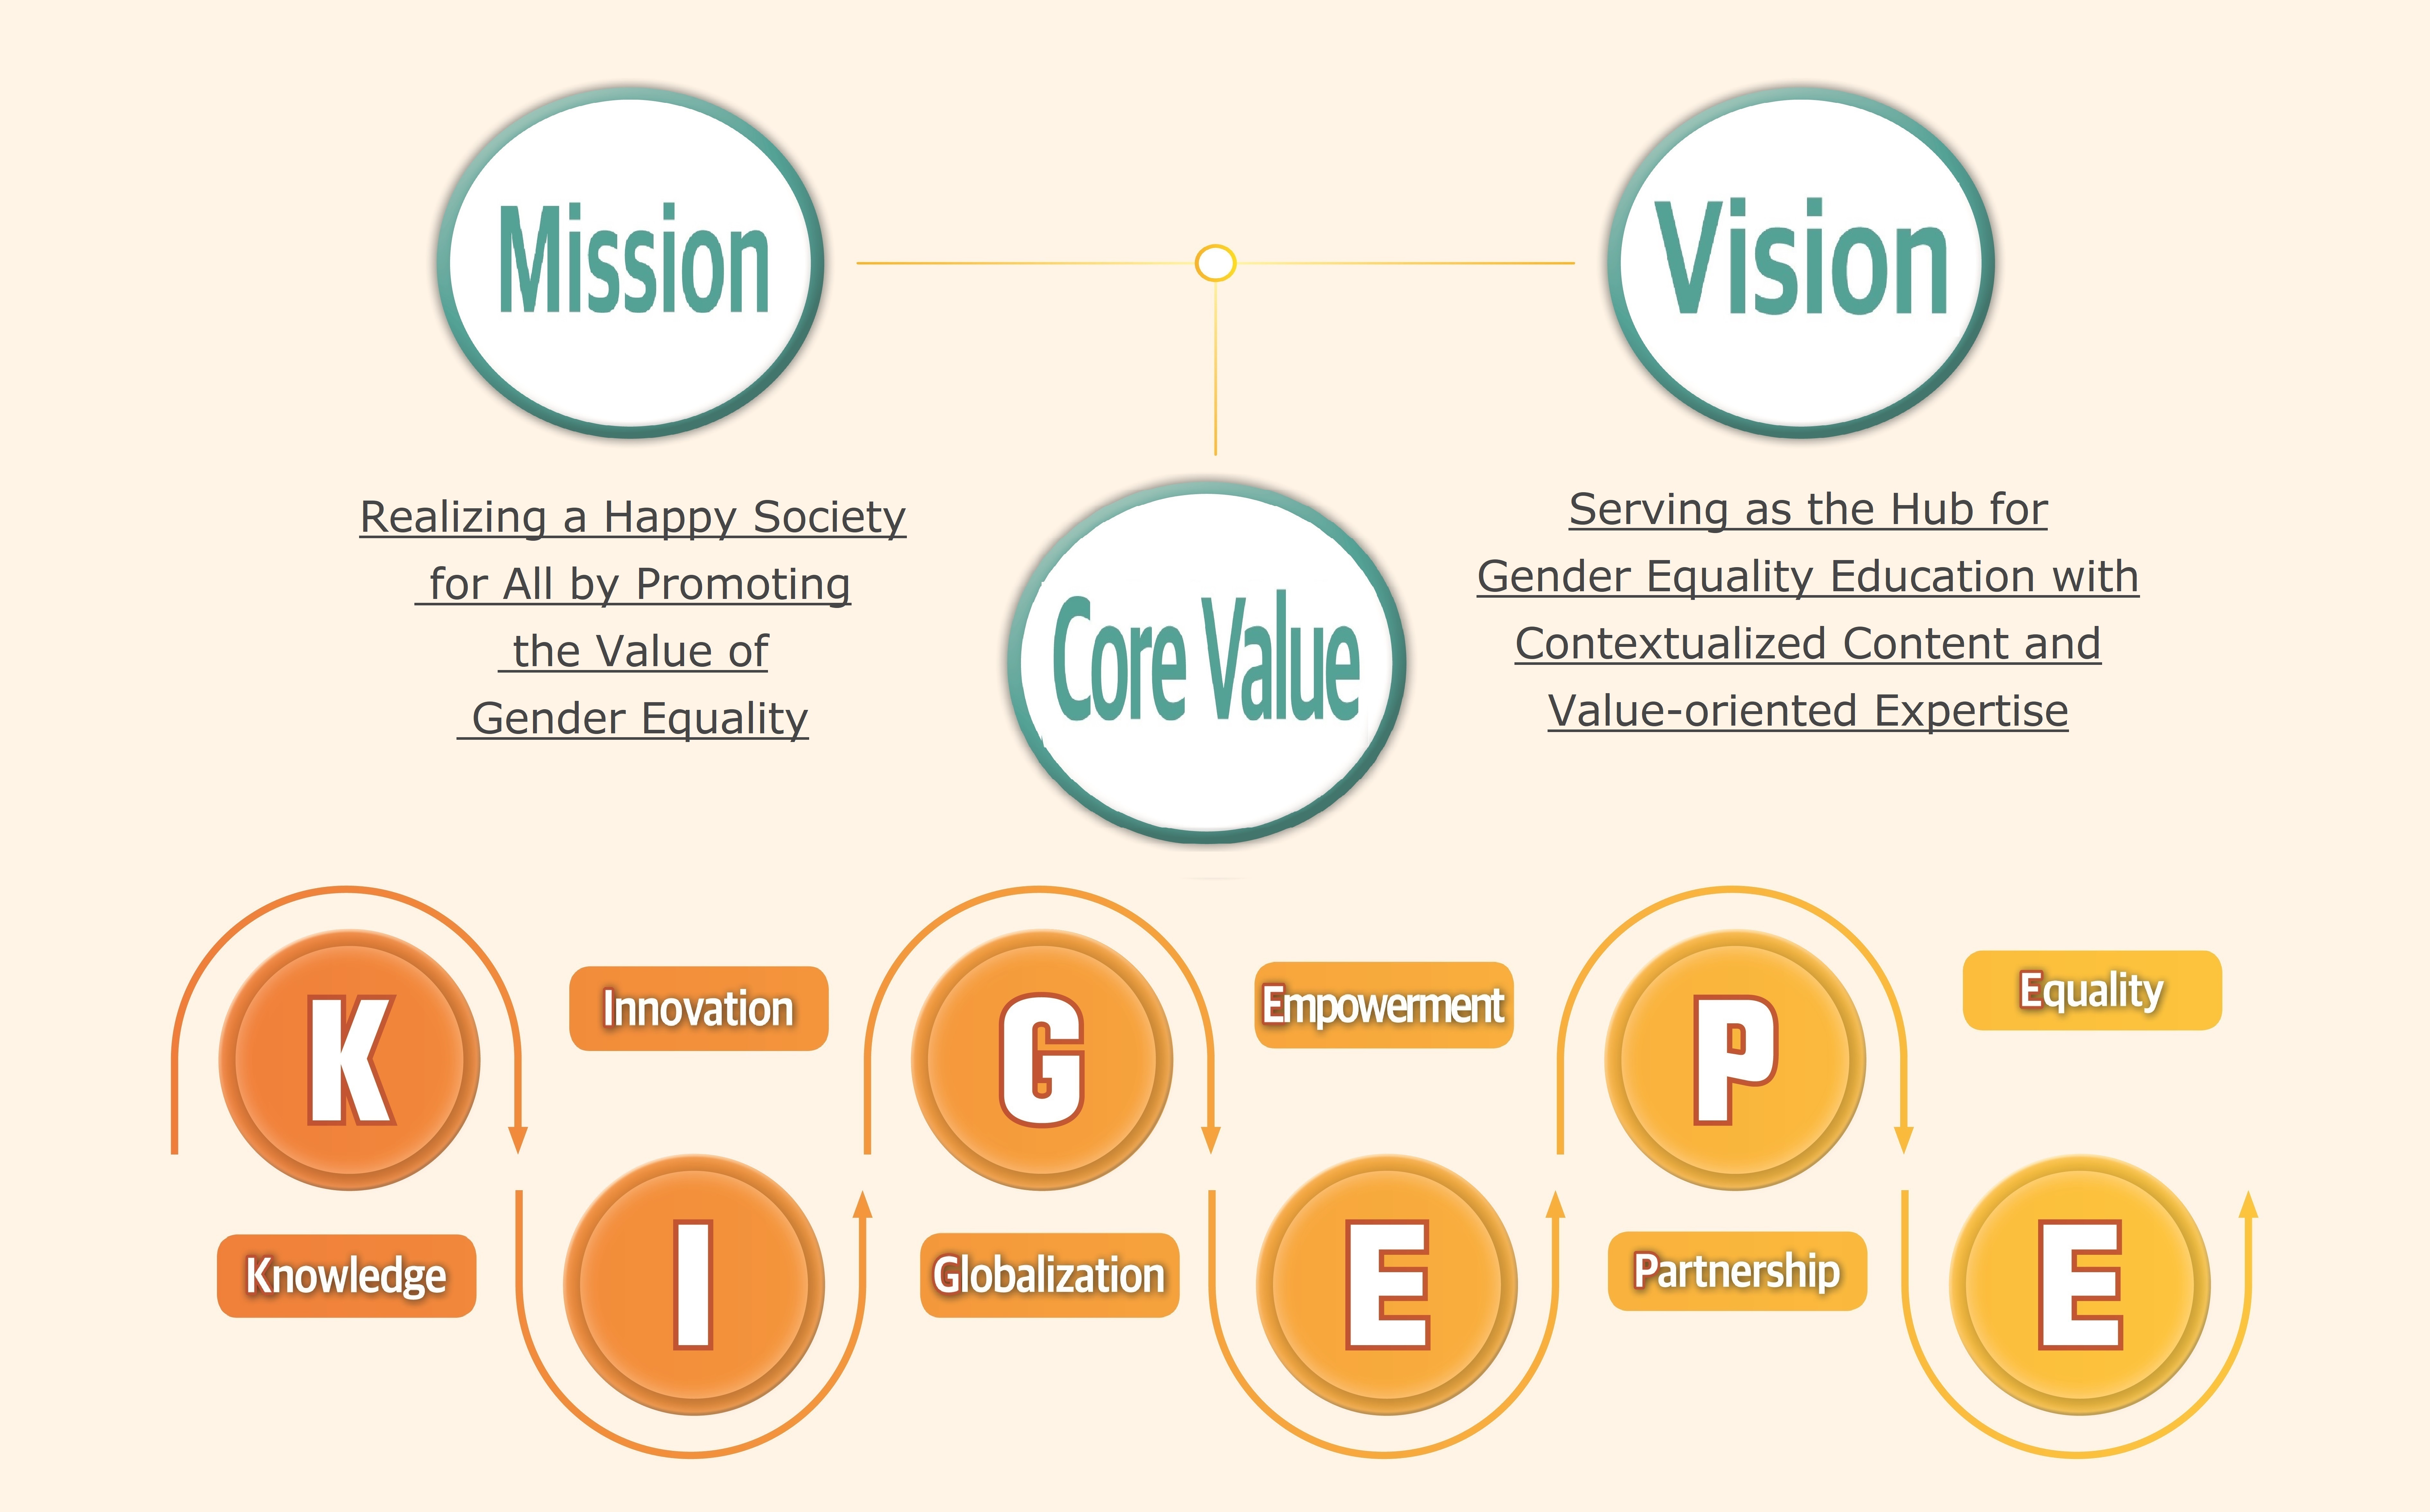 Mission - To promote a happy society for all the value of gender equality, Vision - To become a world leading educational hub of gender equalityby providing empathetic and customized services, Objectives -Spreading Gender equality awareness, Strengthening the foundation of violence prevention, Expansion of smart education, Build a foundation for future management